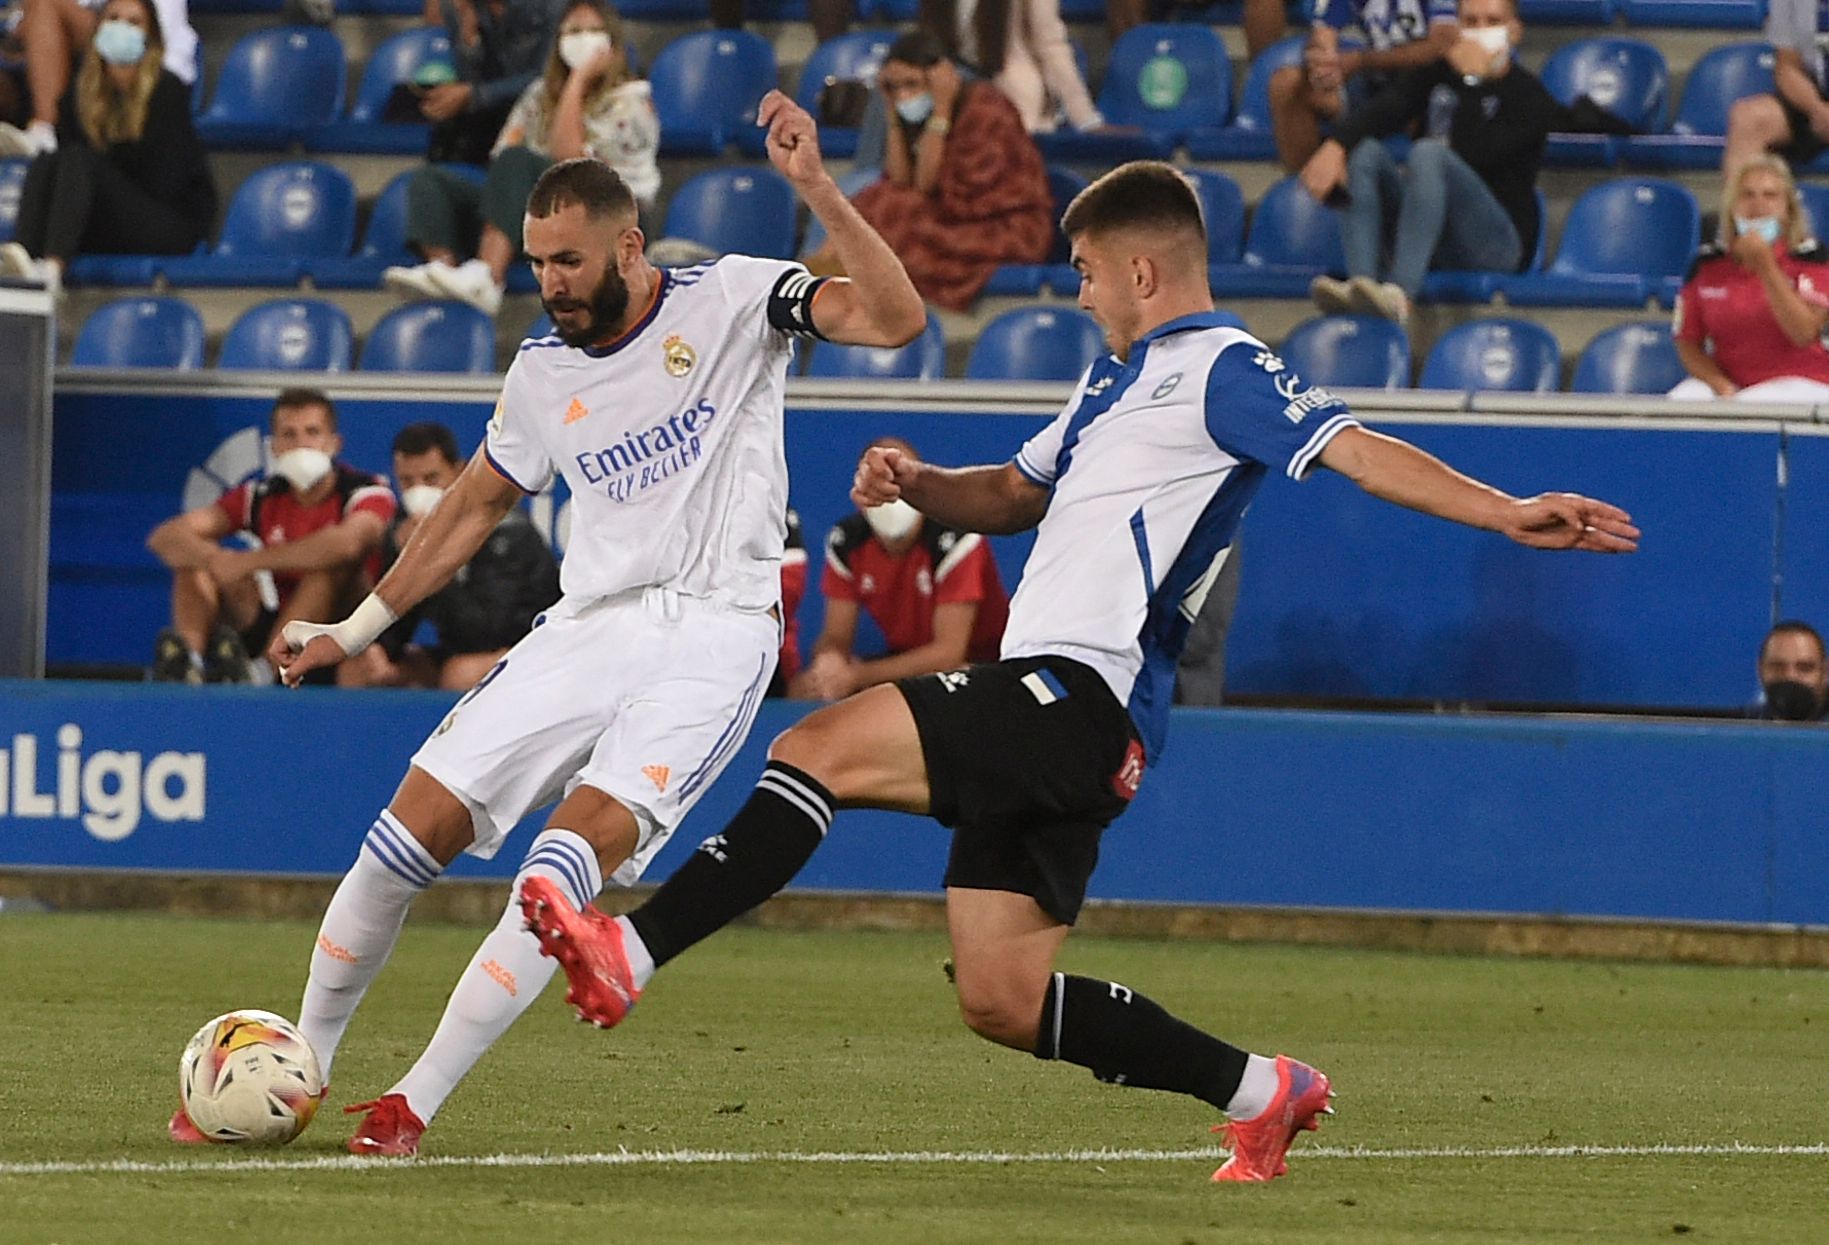 Real Madrid's French forward Karim Benzema (L) vies with Alaves' Spanish midfielder Pere Pons during the Spanish League football match between Alaves and Real Madrid at the Mendizorroza stadium in Vitoria on August 14, 2021. (Photo by Josep LAGO / AFP)